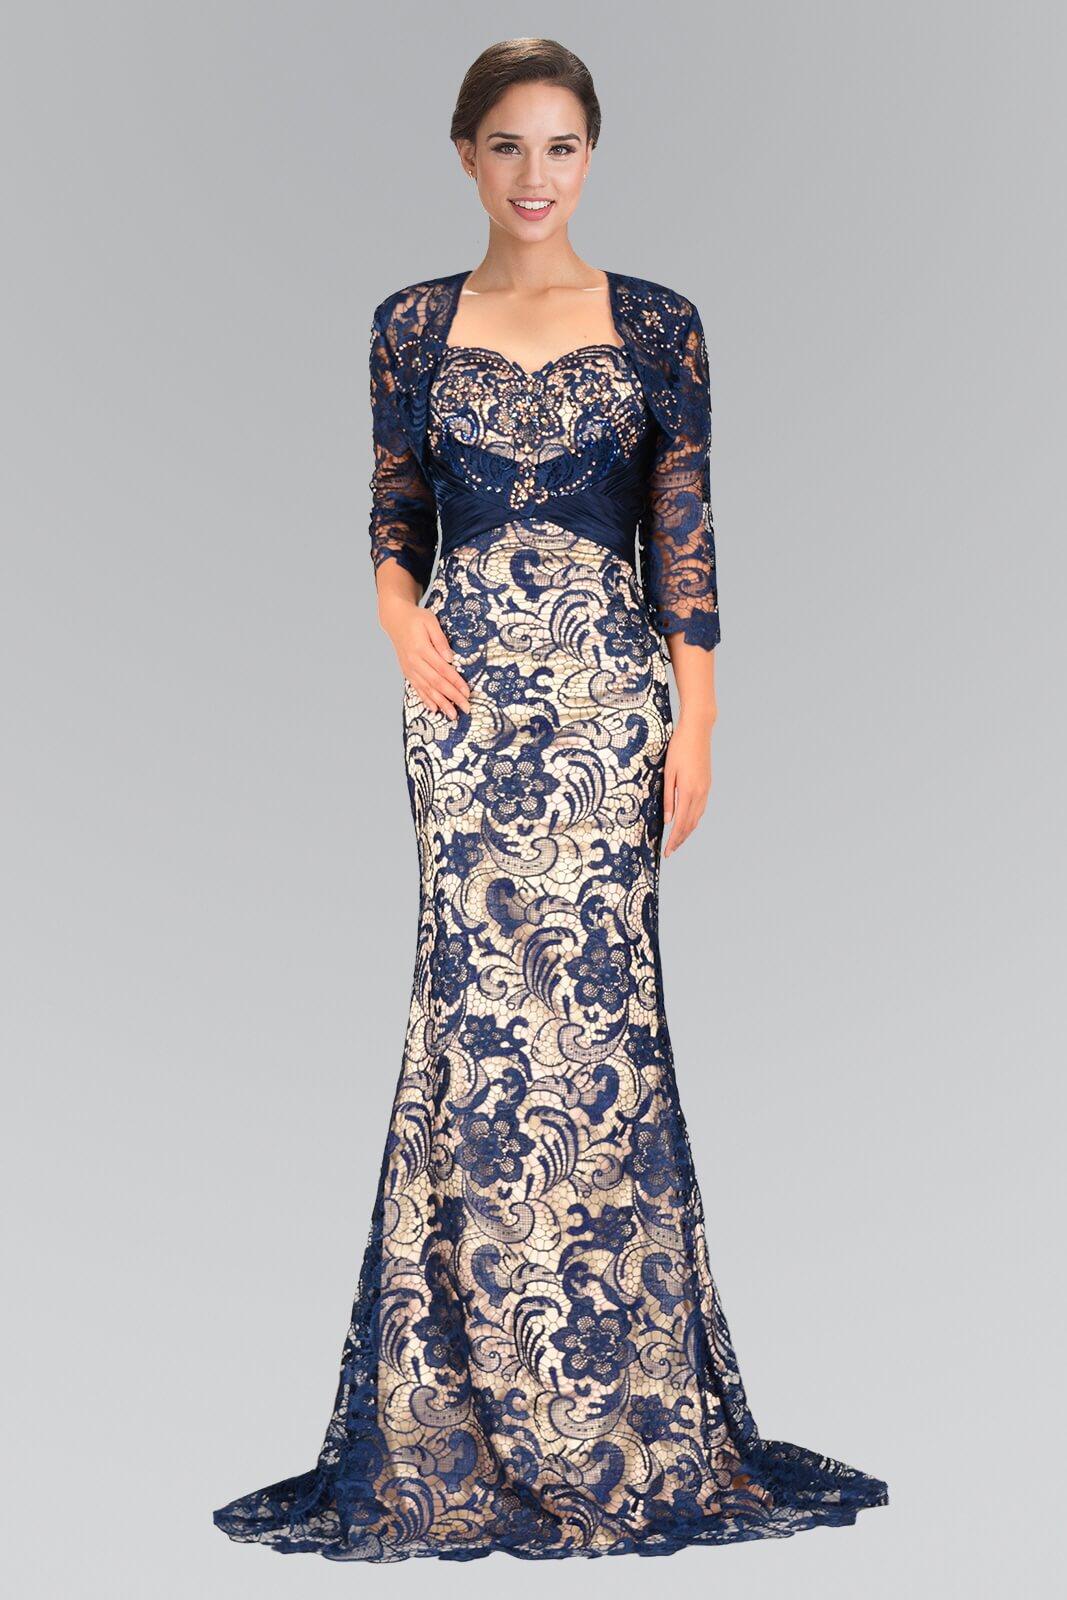 Formal Long Prom Dress Evening Gown | Dress Outlet – The Dress Outlet